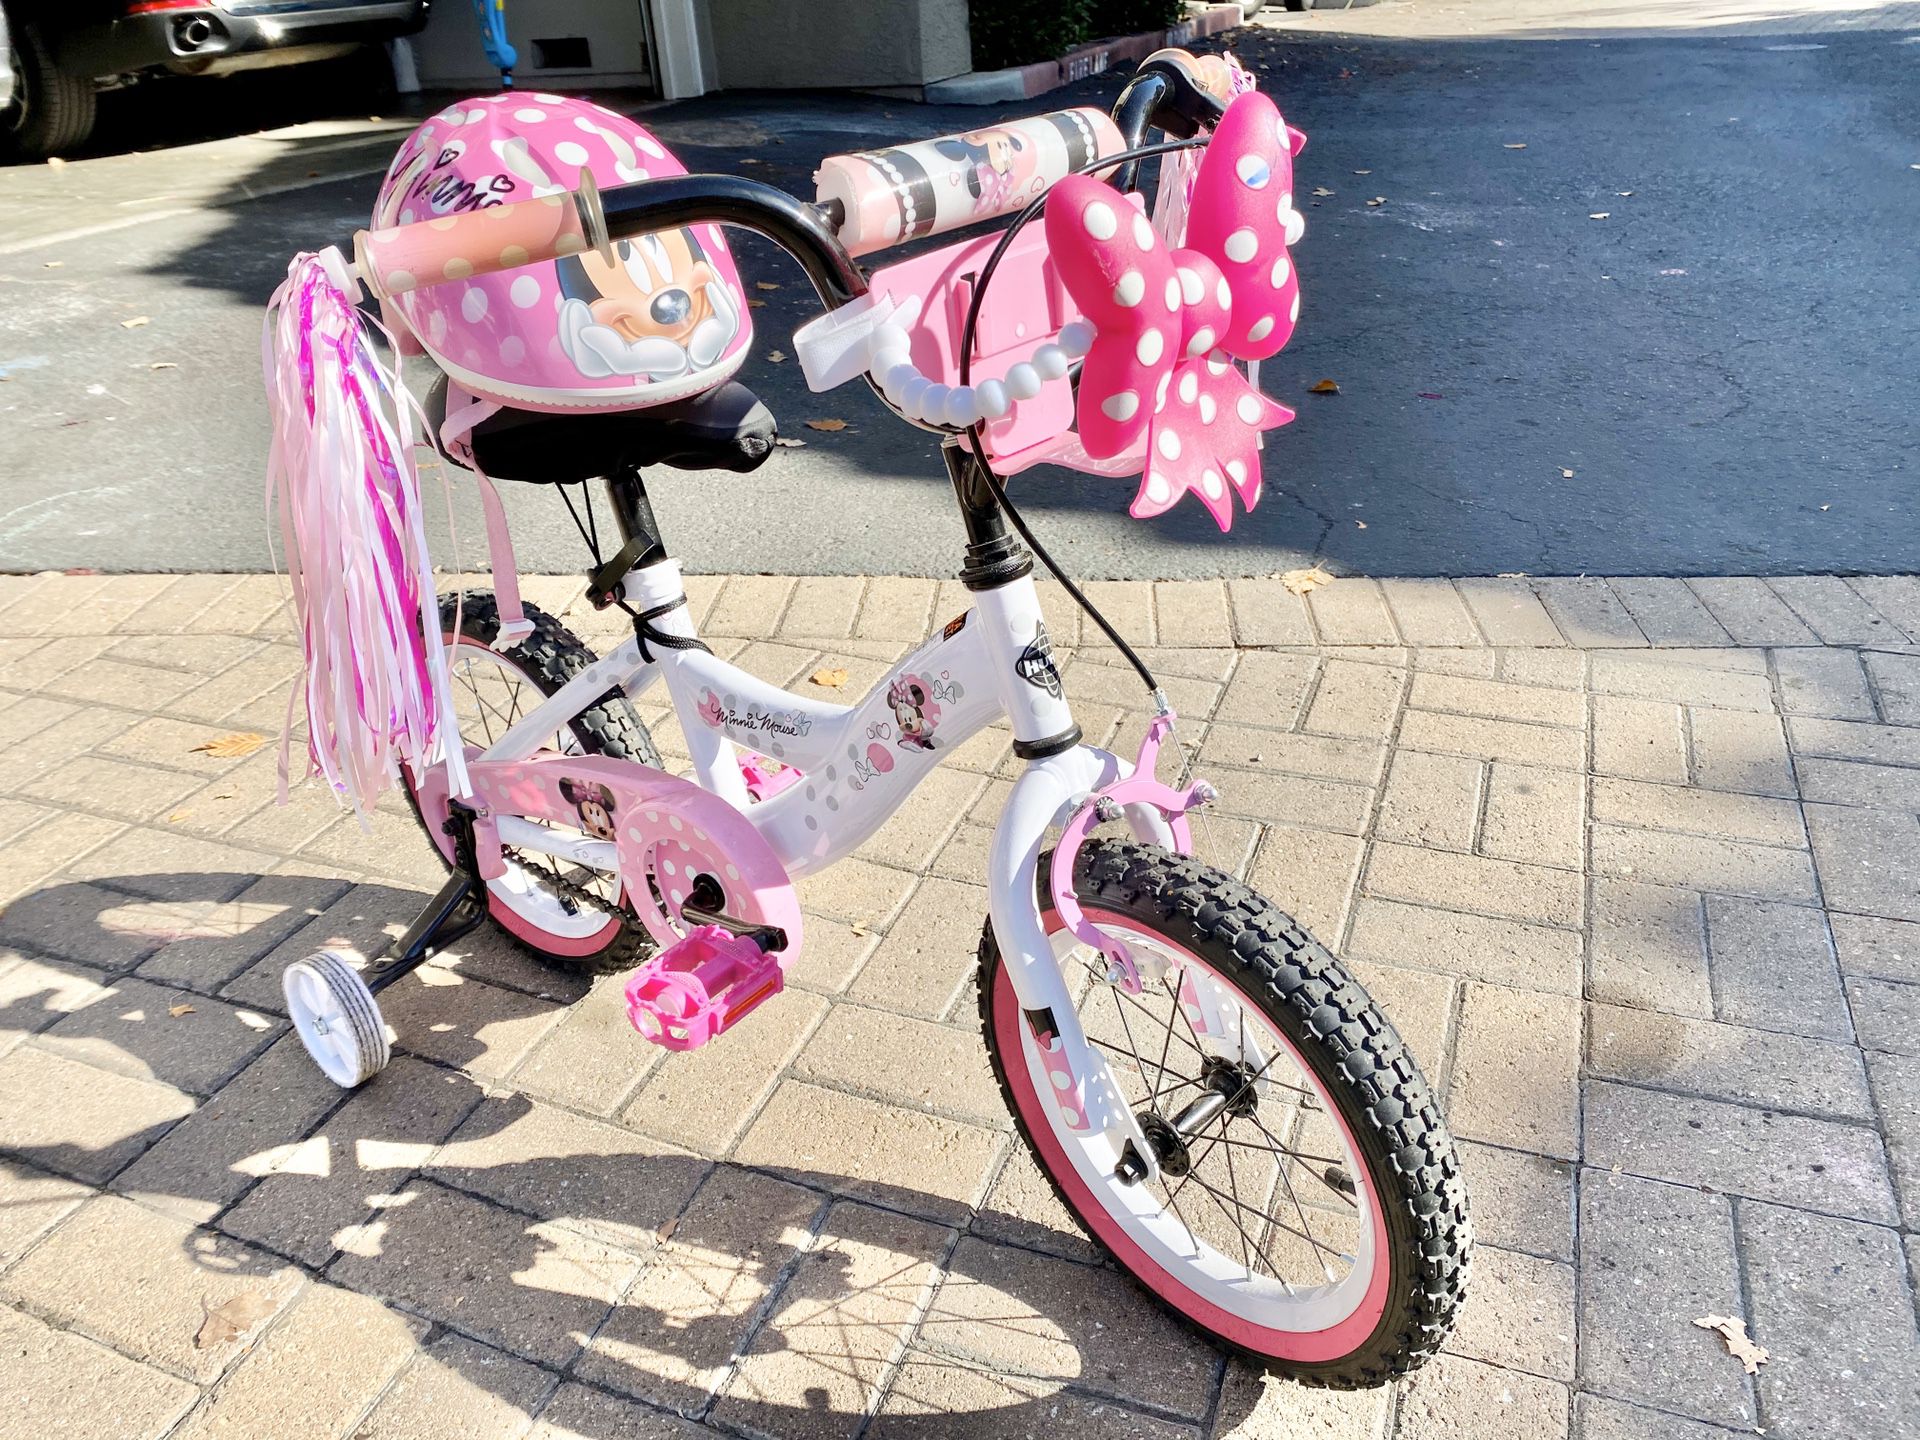 Minnie bike (with brakes) and helmet for kids